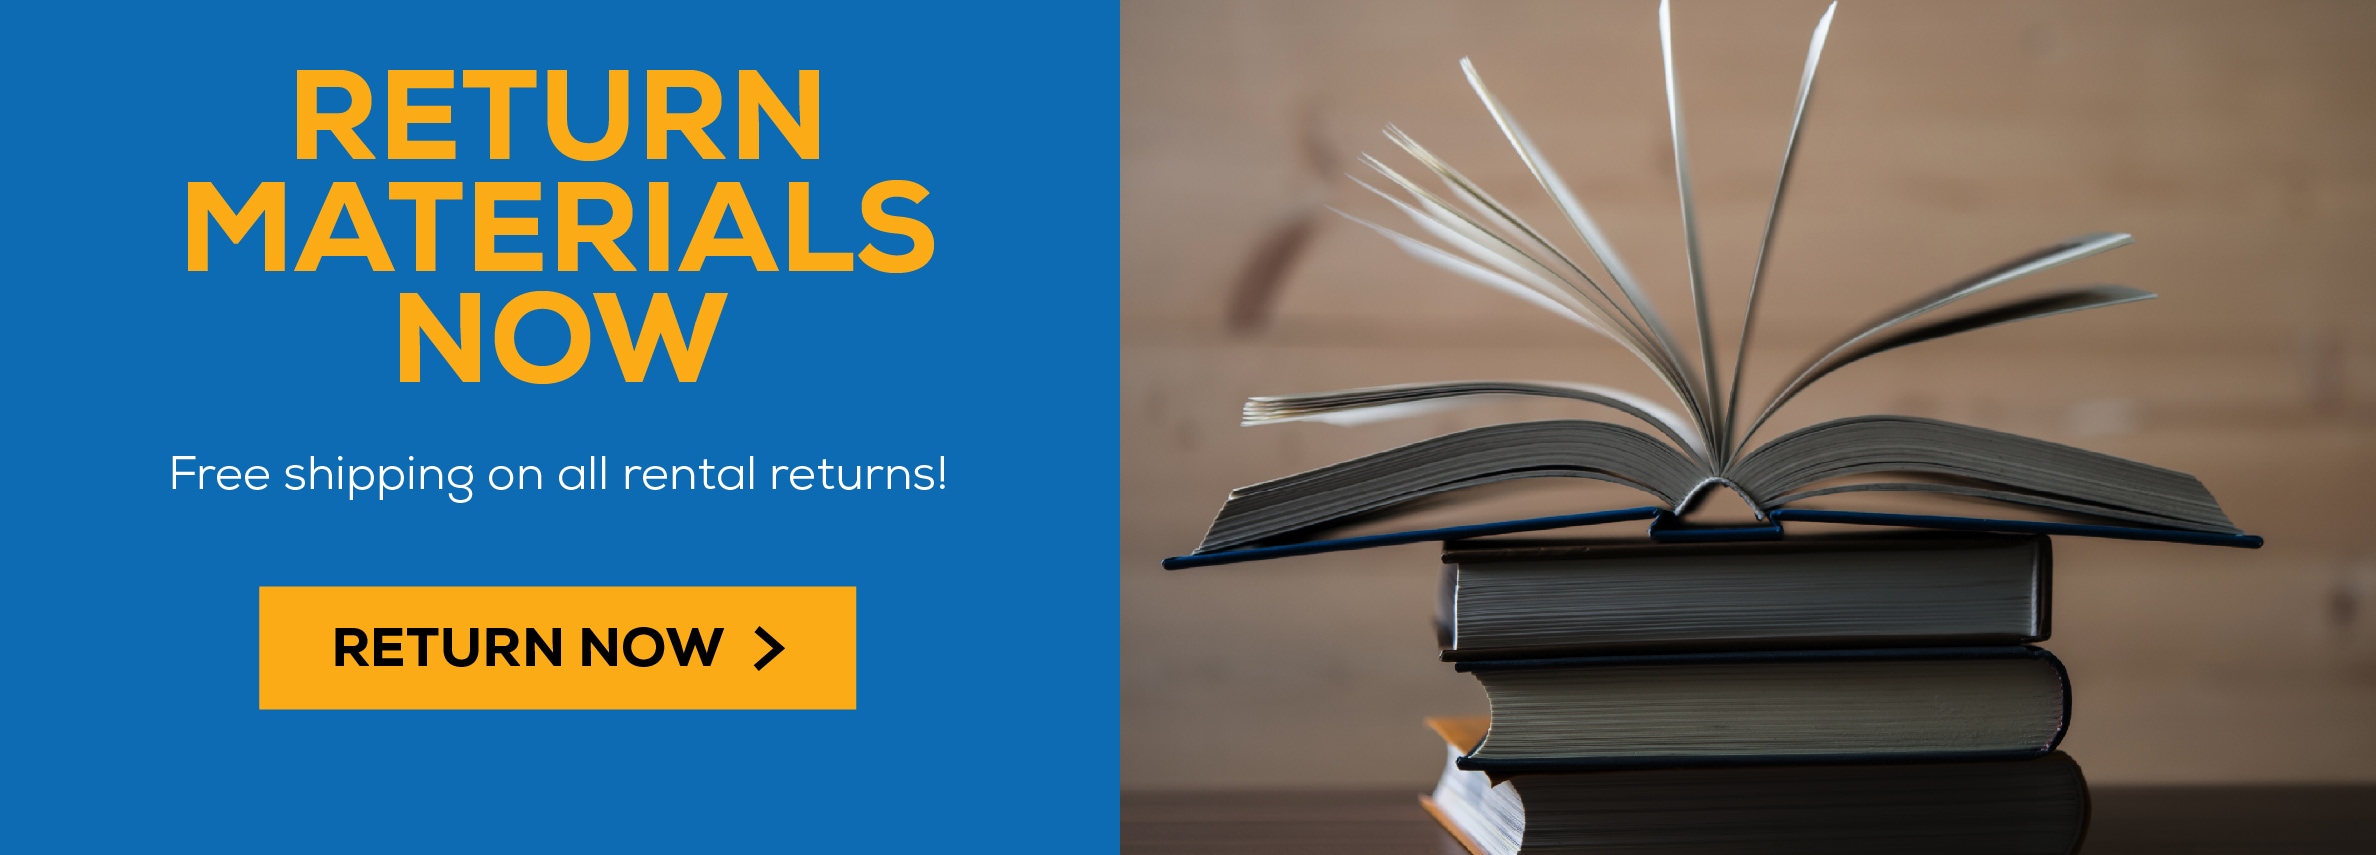 RETURN MATERIALS NOW Free shipping on all rental returns! RETURN NOW >